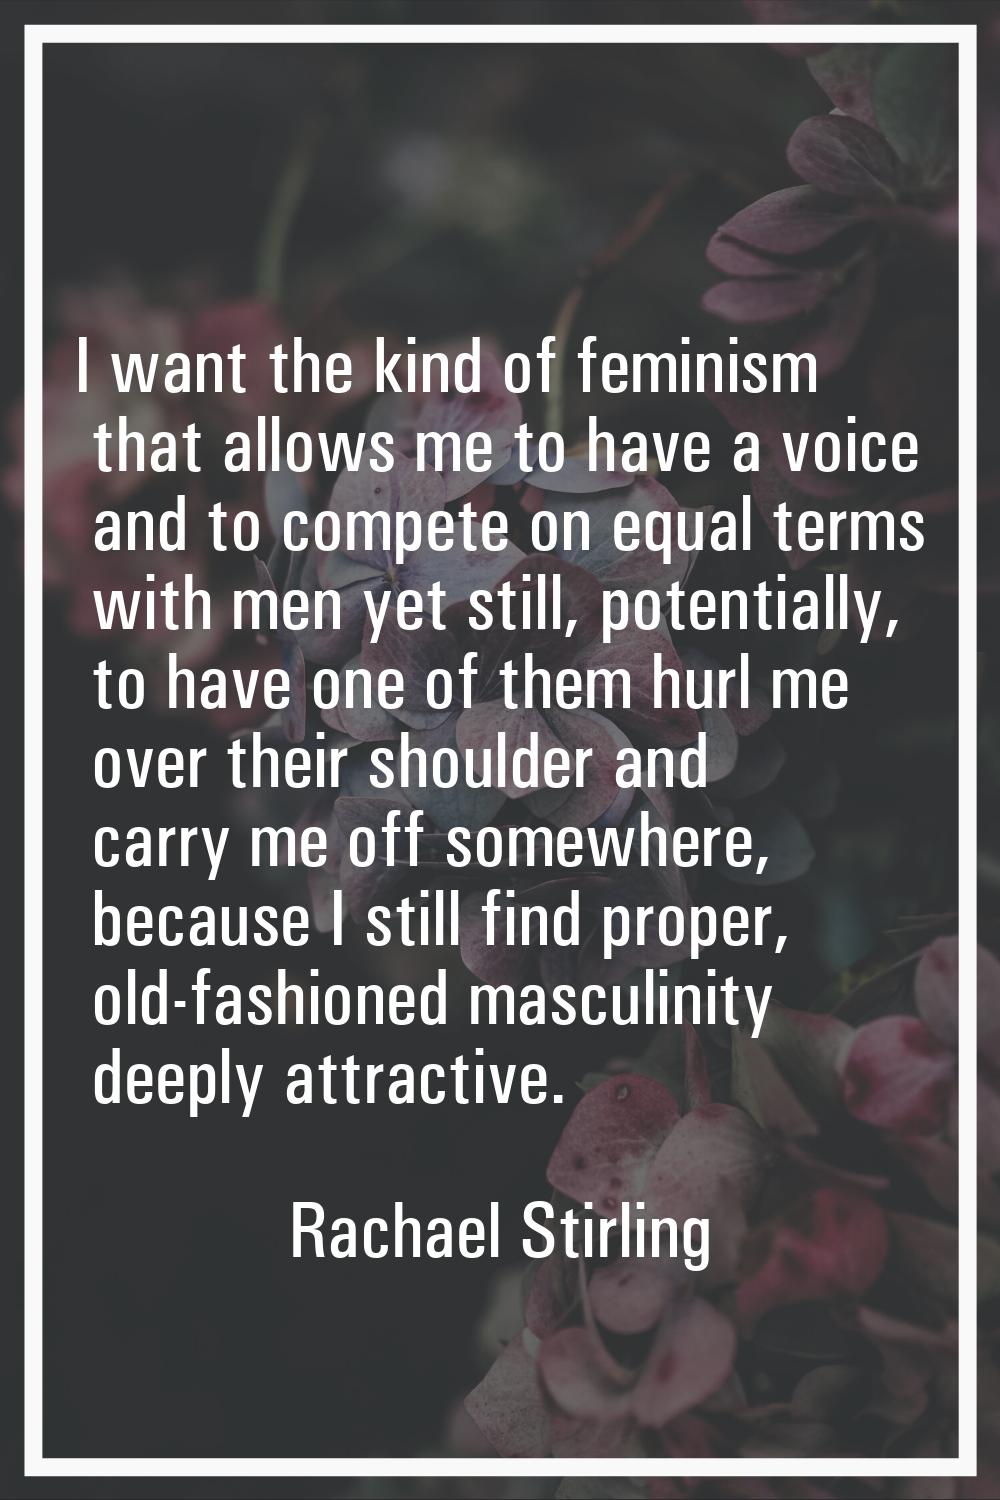 I want the kind of feminism that allows me to have a voice and to compete on equal terms with men y